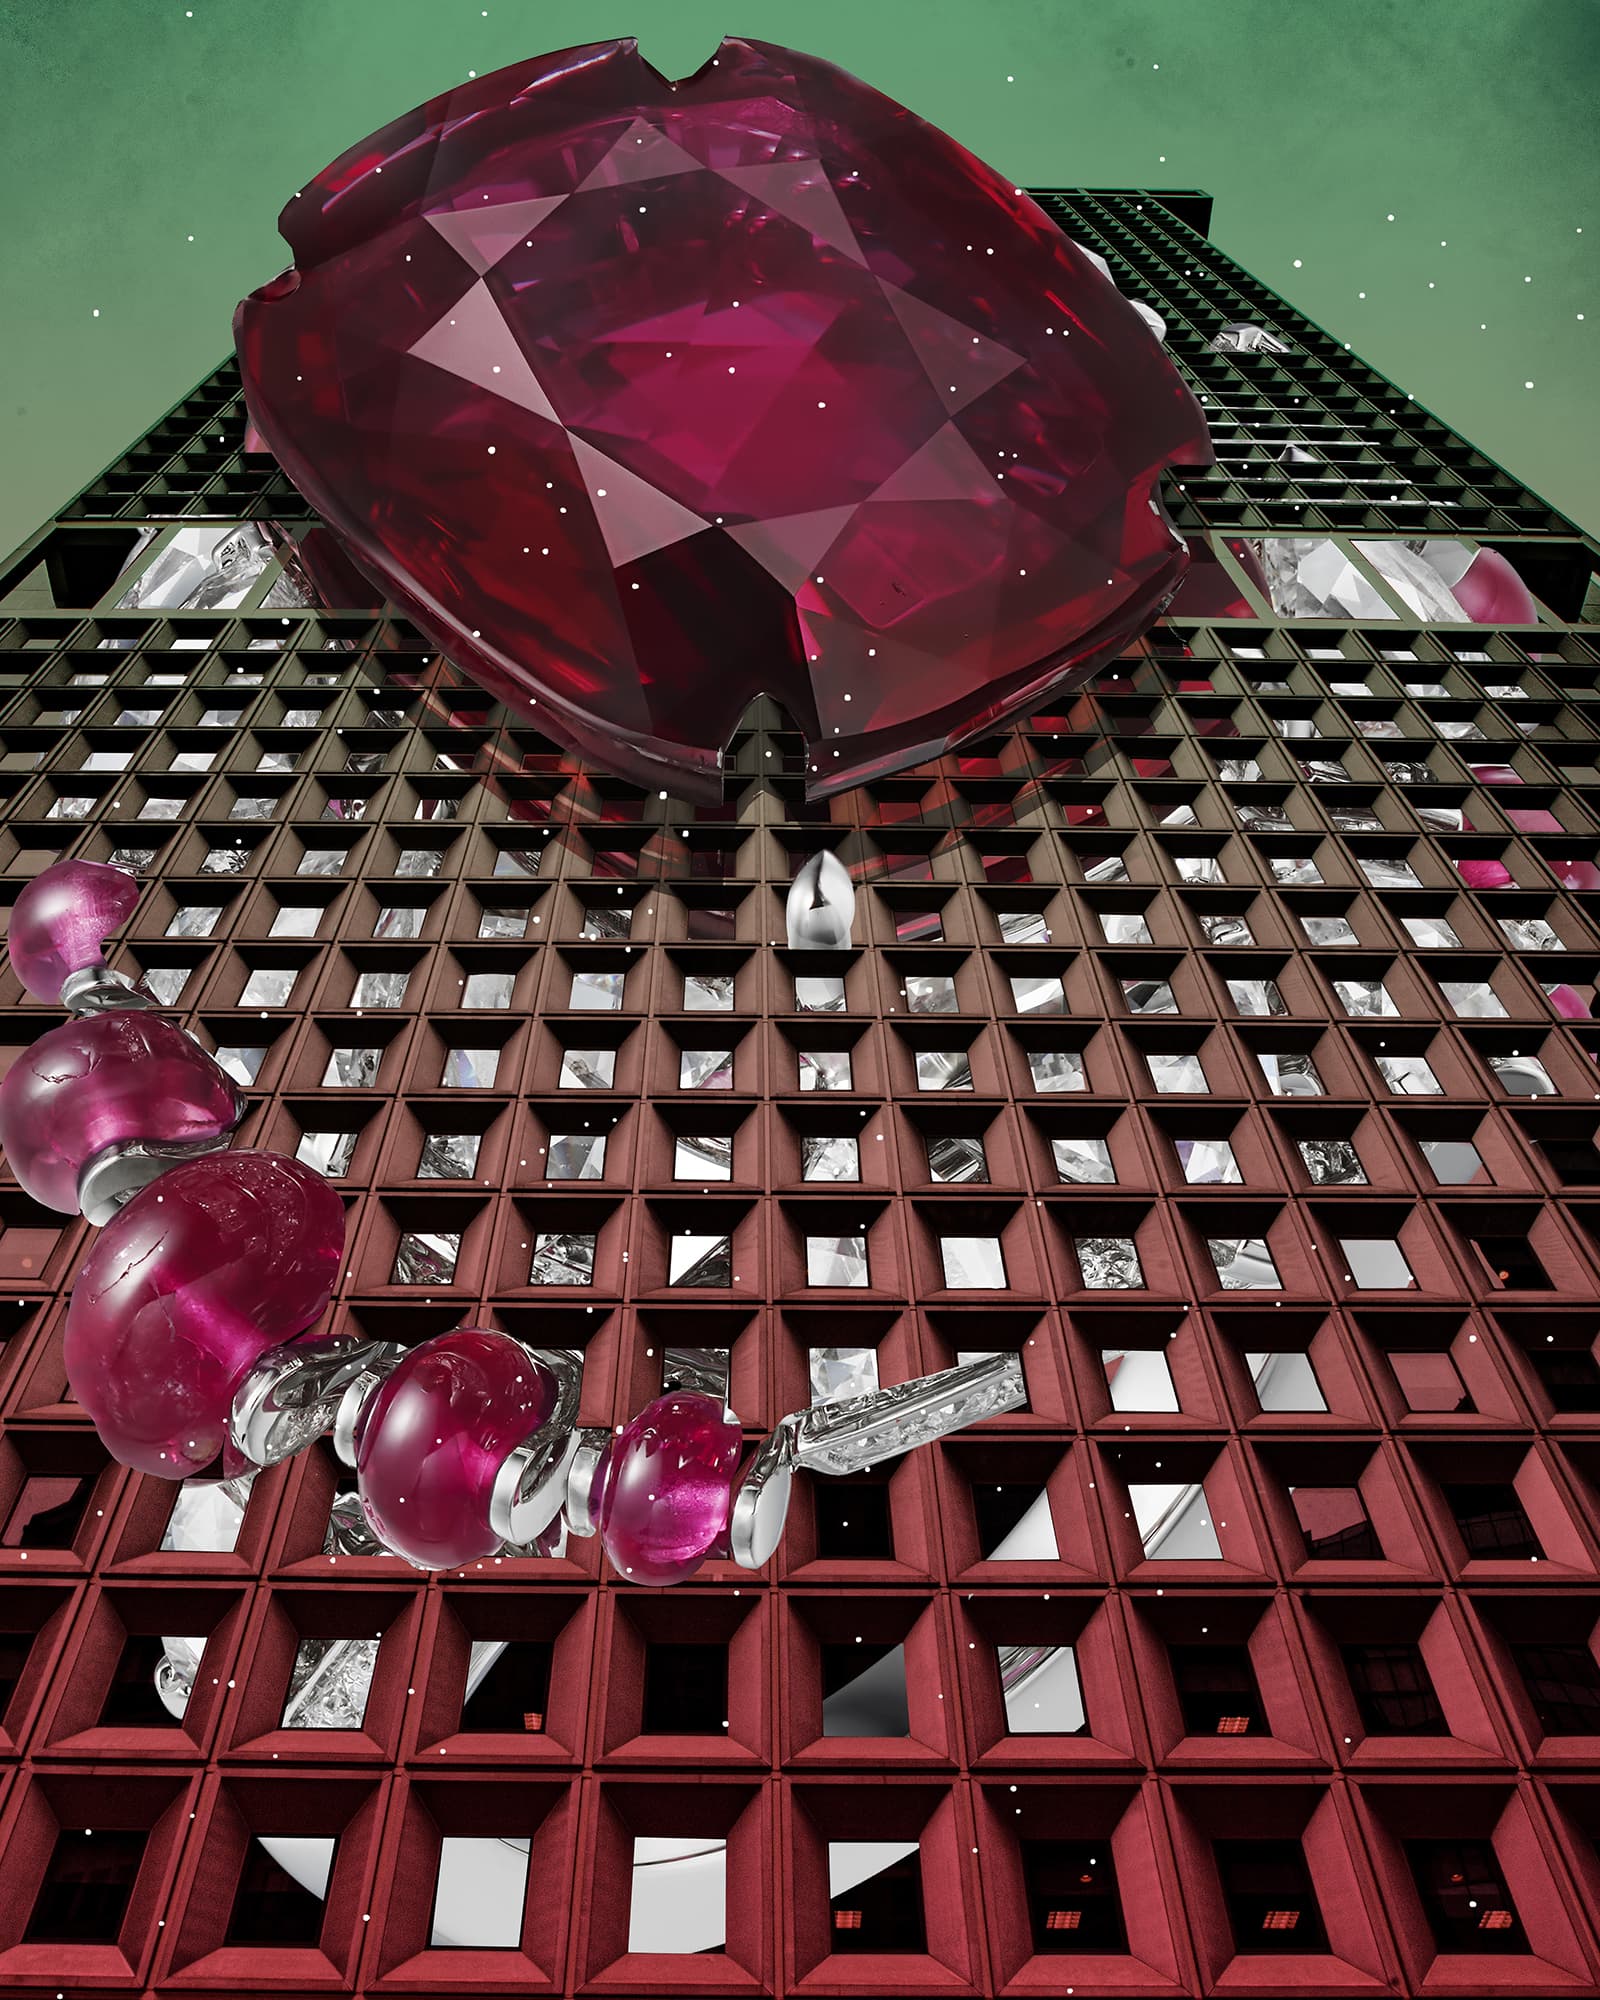 Cartier Phaan ring from the Sixième Sens par Cartier High Jewellery collection embellished with an 8.20 carat ruby, ruby beads and diamonds 